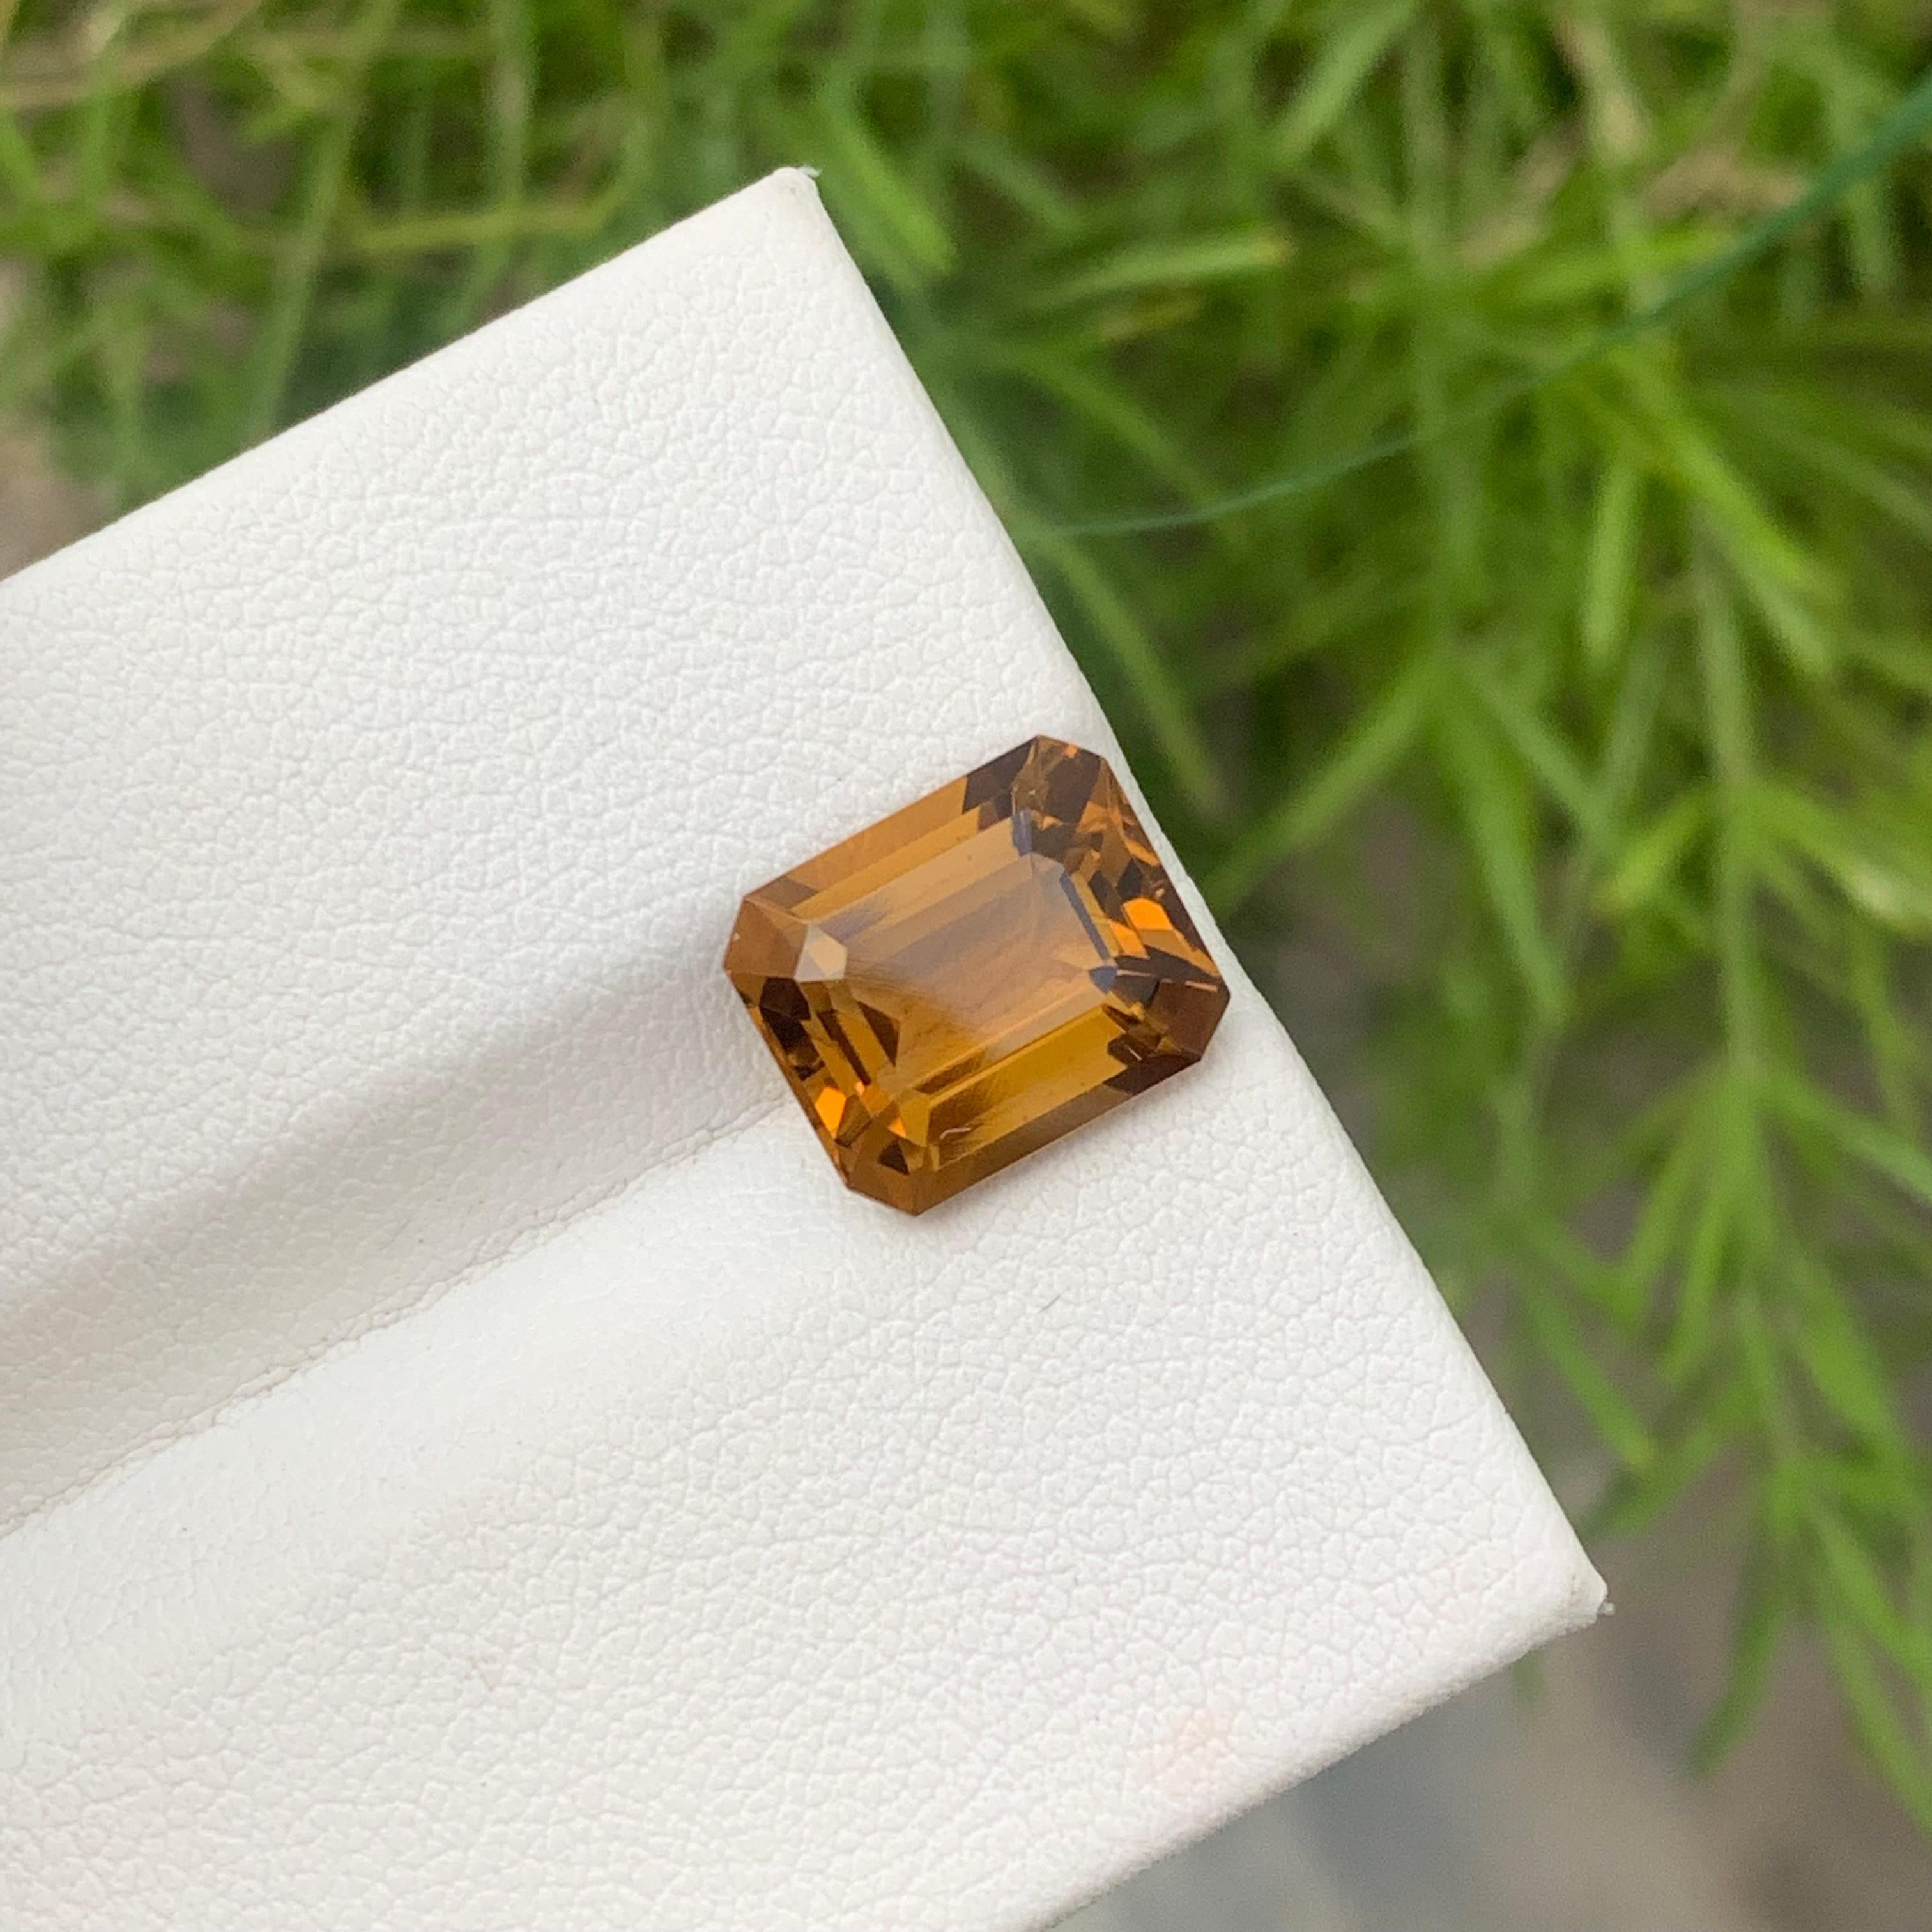 Faceted Honey Citrine
Weight : 4.20 Carats
Dimensions : 10.8x9.1x6.1 Mm
Clarity : Eye Clean 
Origin : Brazil
Color: Yellow
Shape: Emerald 
Certificate: On Demand
Month: November
.
The Many Healing Properties of Citrine
Increase Optimism, And Sunny